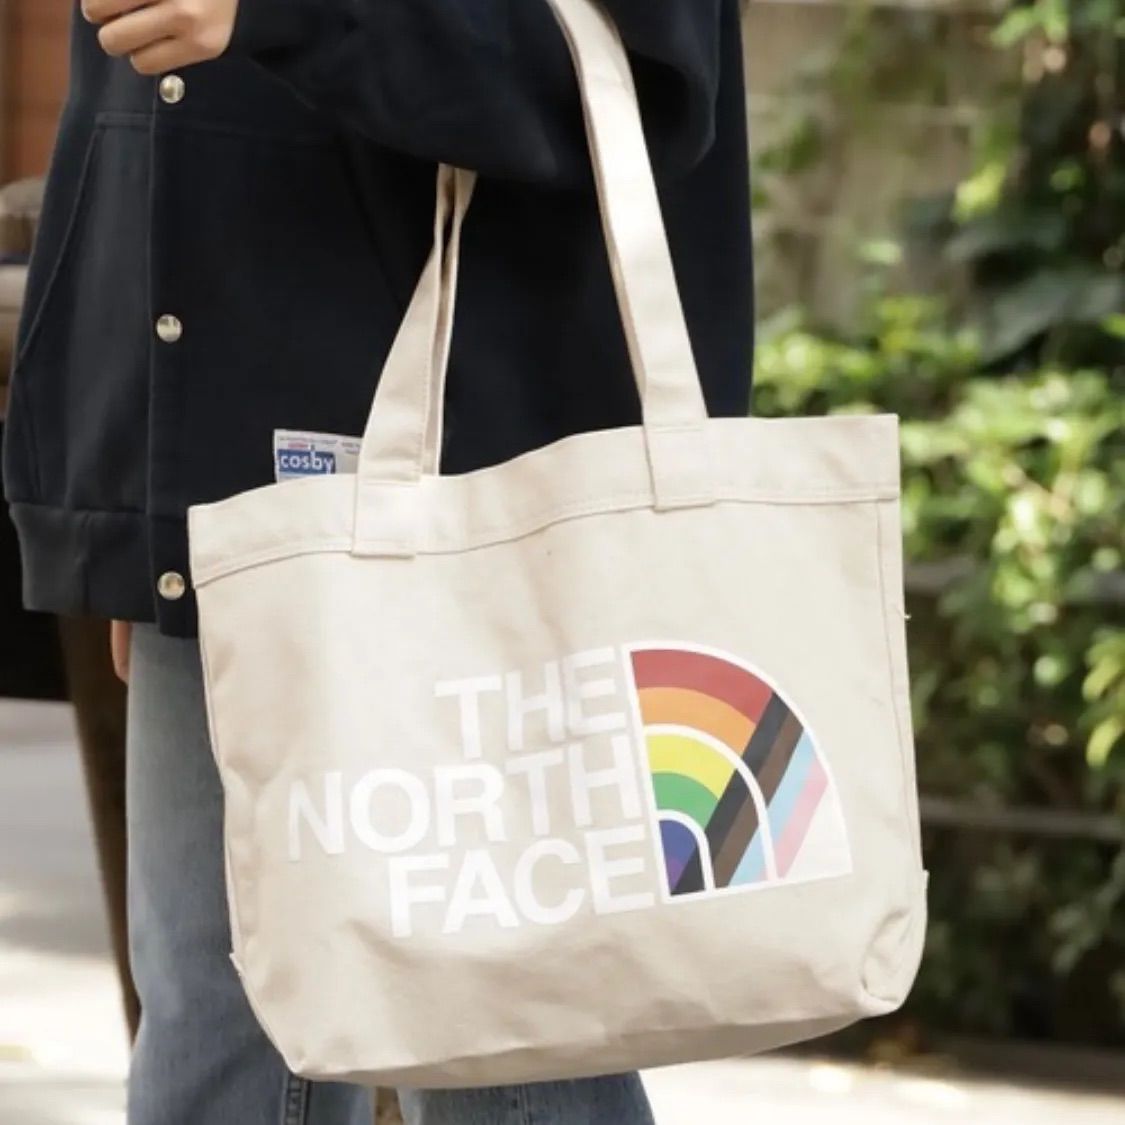 THE NORTHFACE / PRIDE TOTE トートバッグ - メルカリ